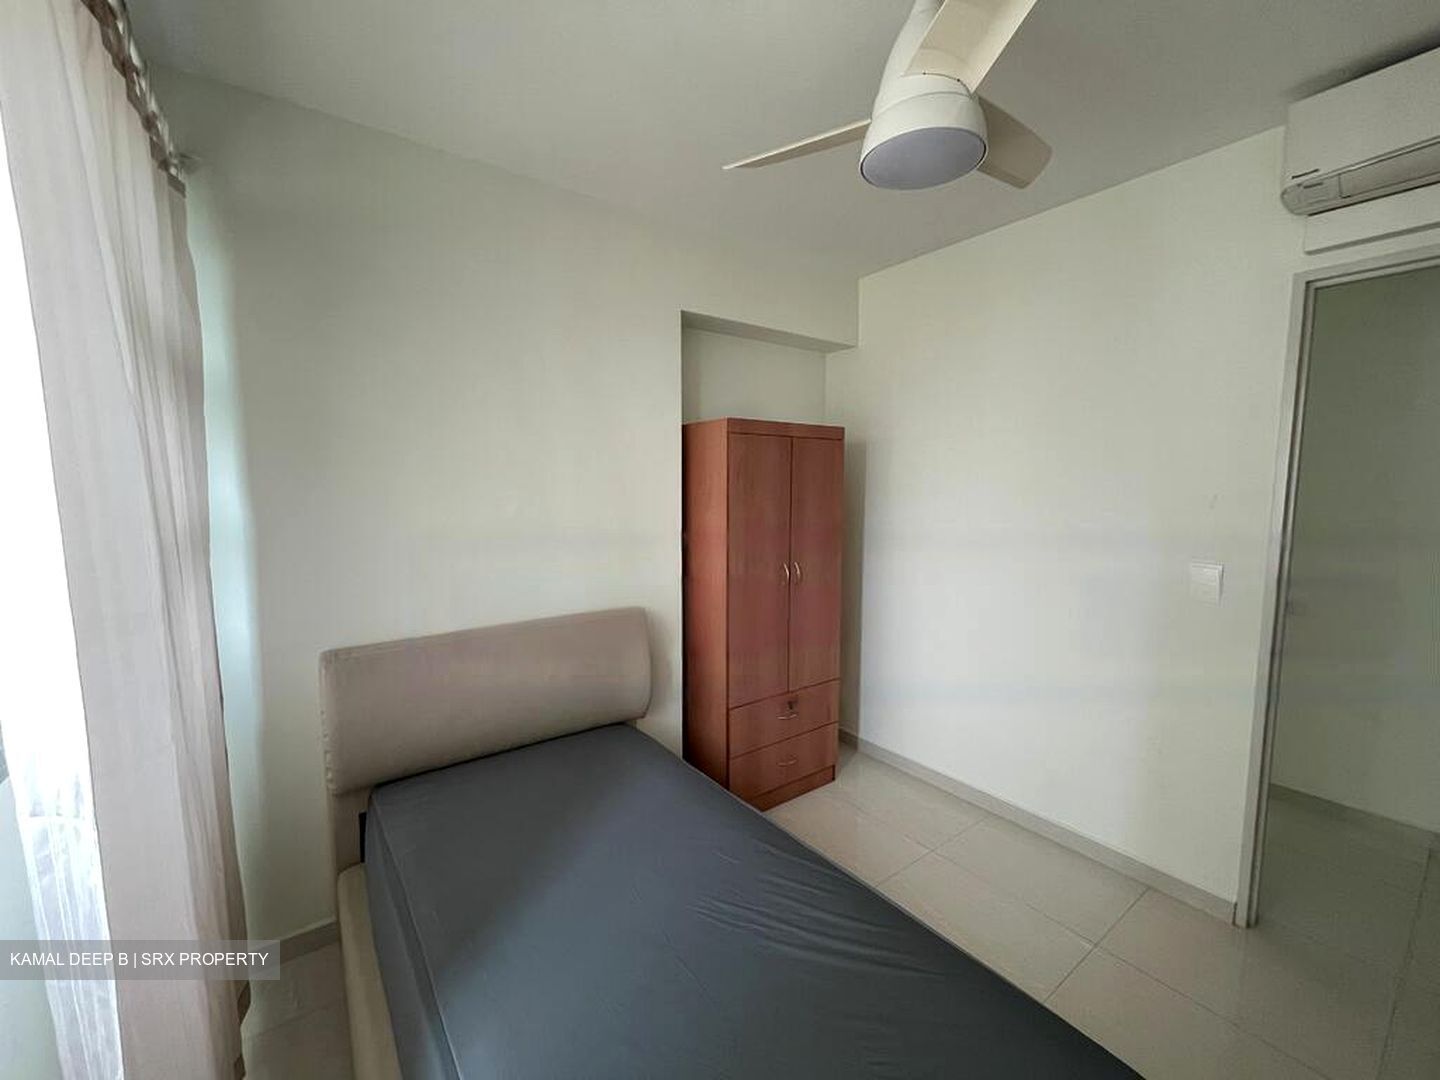 Blk 130A Toa Payoh Crest (Toa Payoh), HDB 3 Rooms #422261661